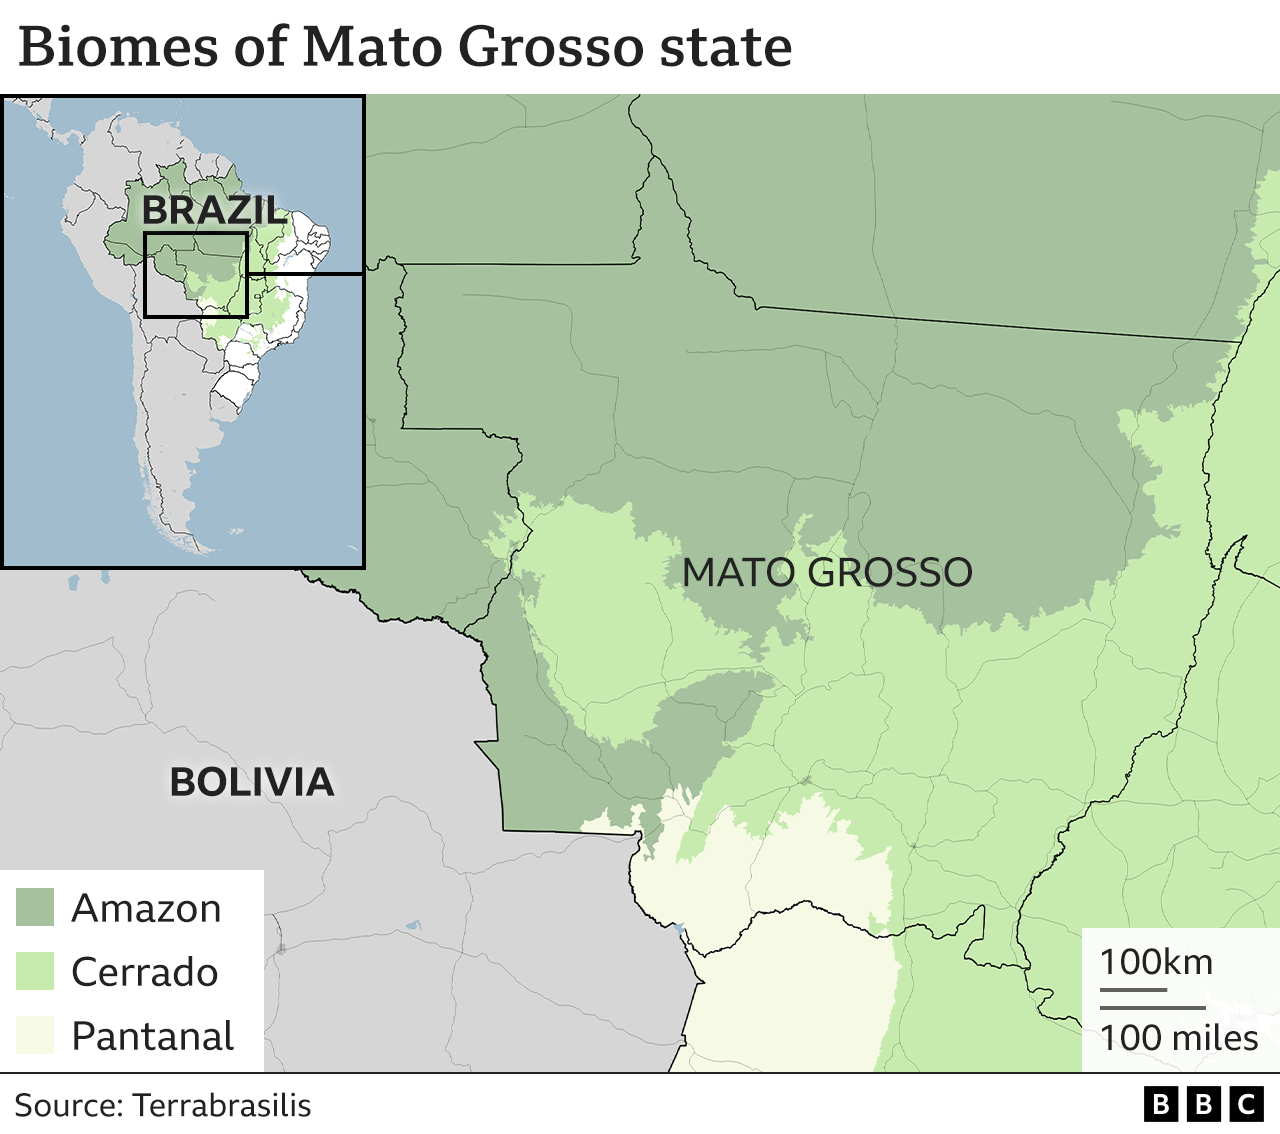 Map showing the different biomes, Amazon, Cerrado and Pantanal, in Mato Grosso state in Brazil